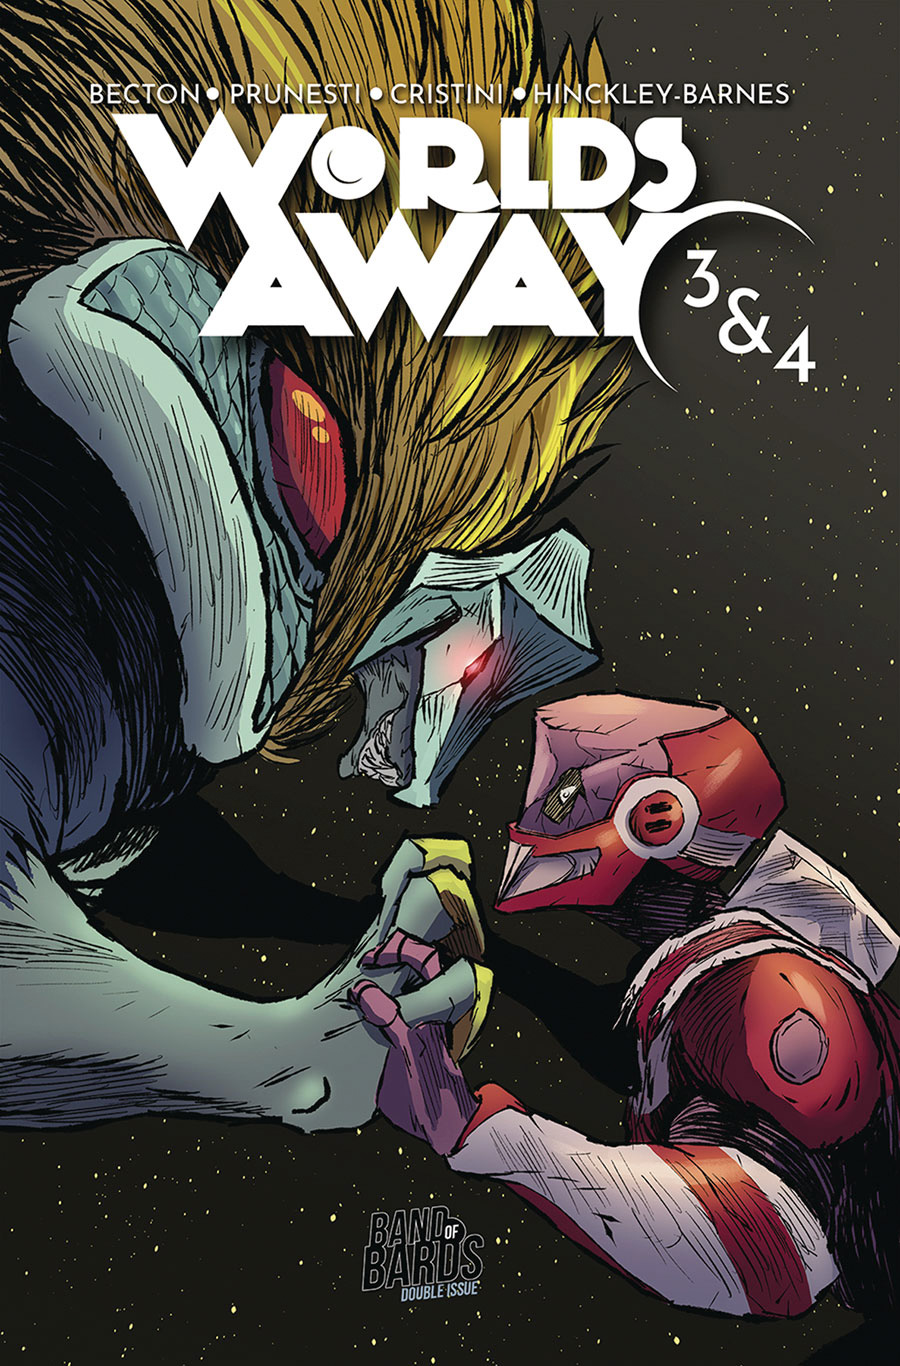 Worlds Away #3 & 4 Double Issue